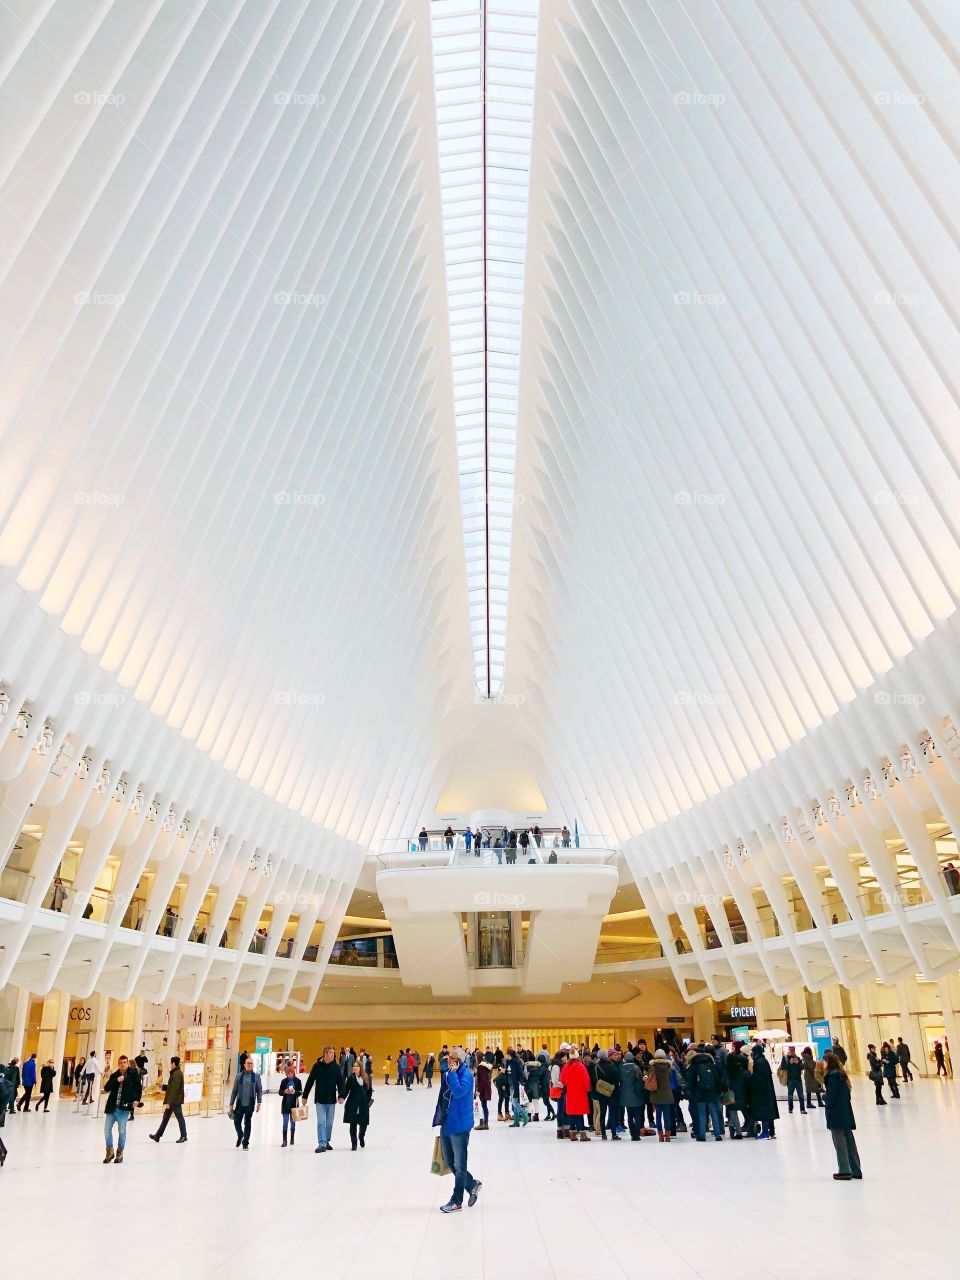 The morning commute inside the Oculus in New York City, NY. 